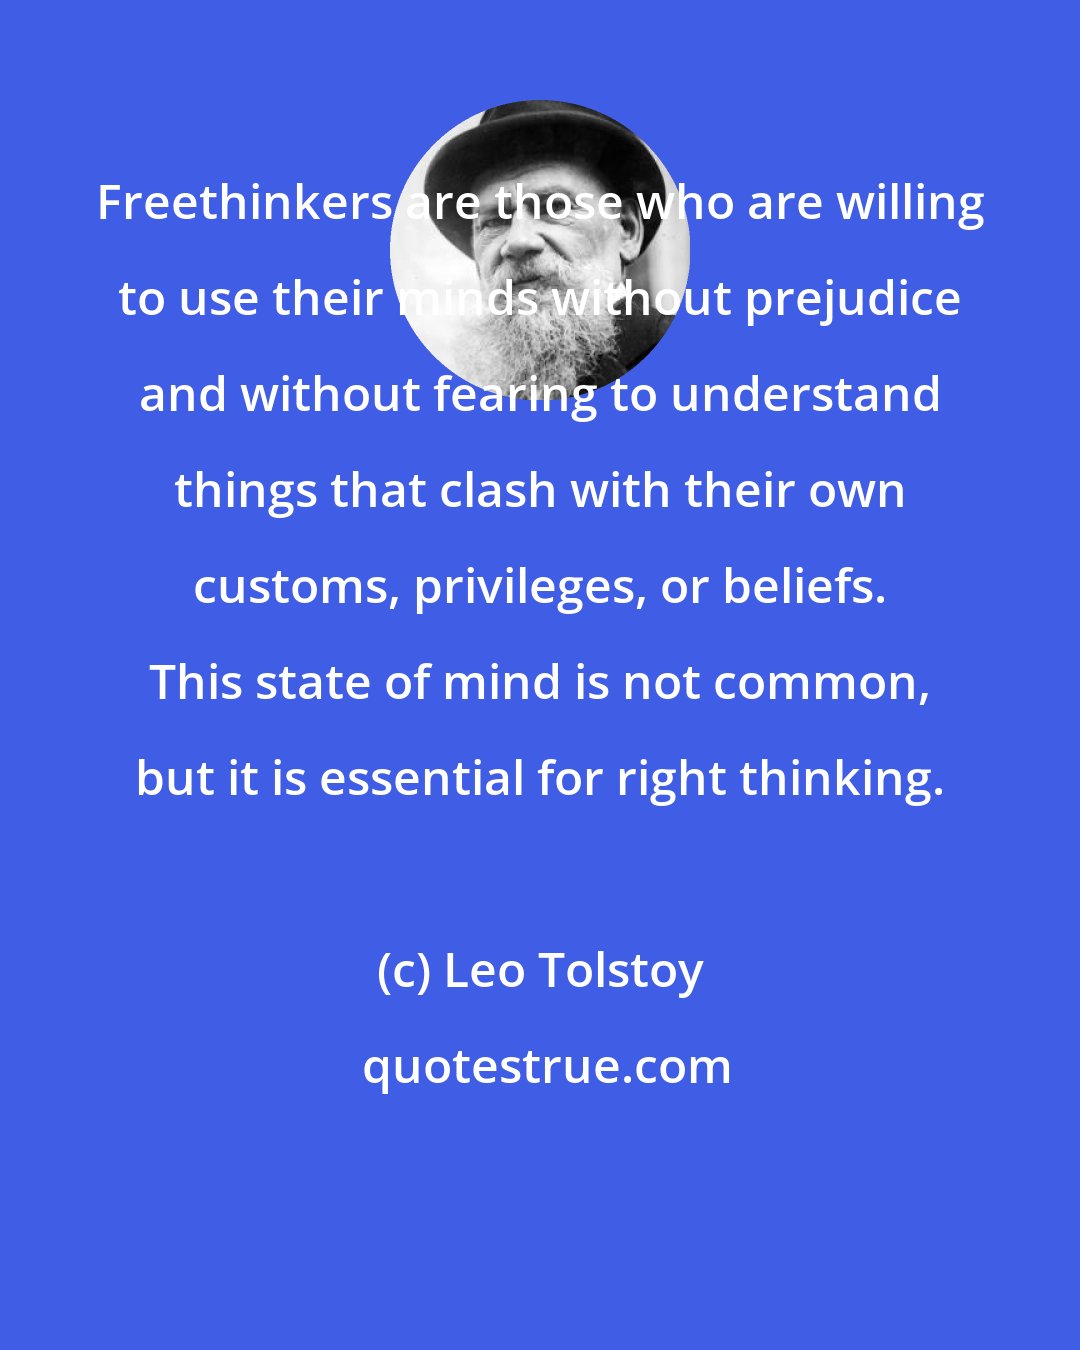 Leo Tolstoy: Freethinkers are those who are willing to use their minds without prejudice and without fearing to understand things that clash with their own customs, privileges, or beliefs. This state of mind is not common, but it is essential for right thinking.